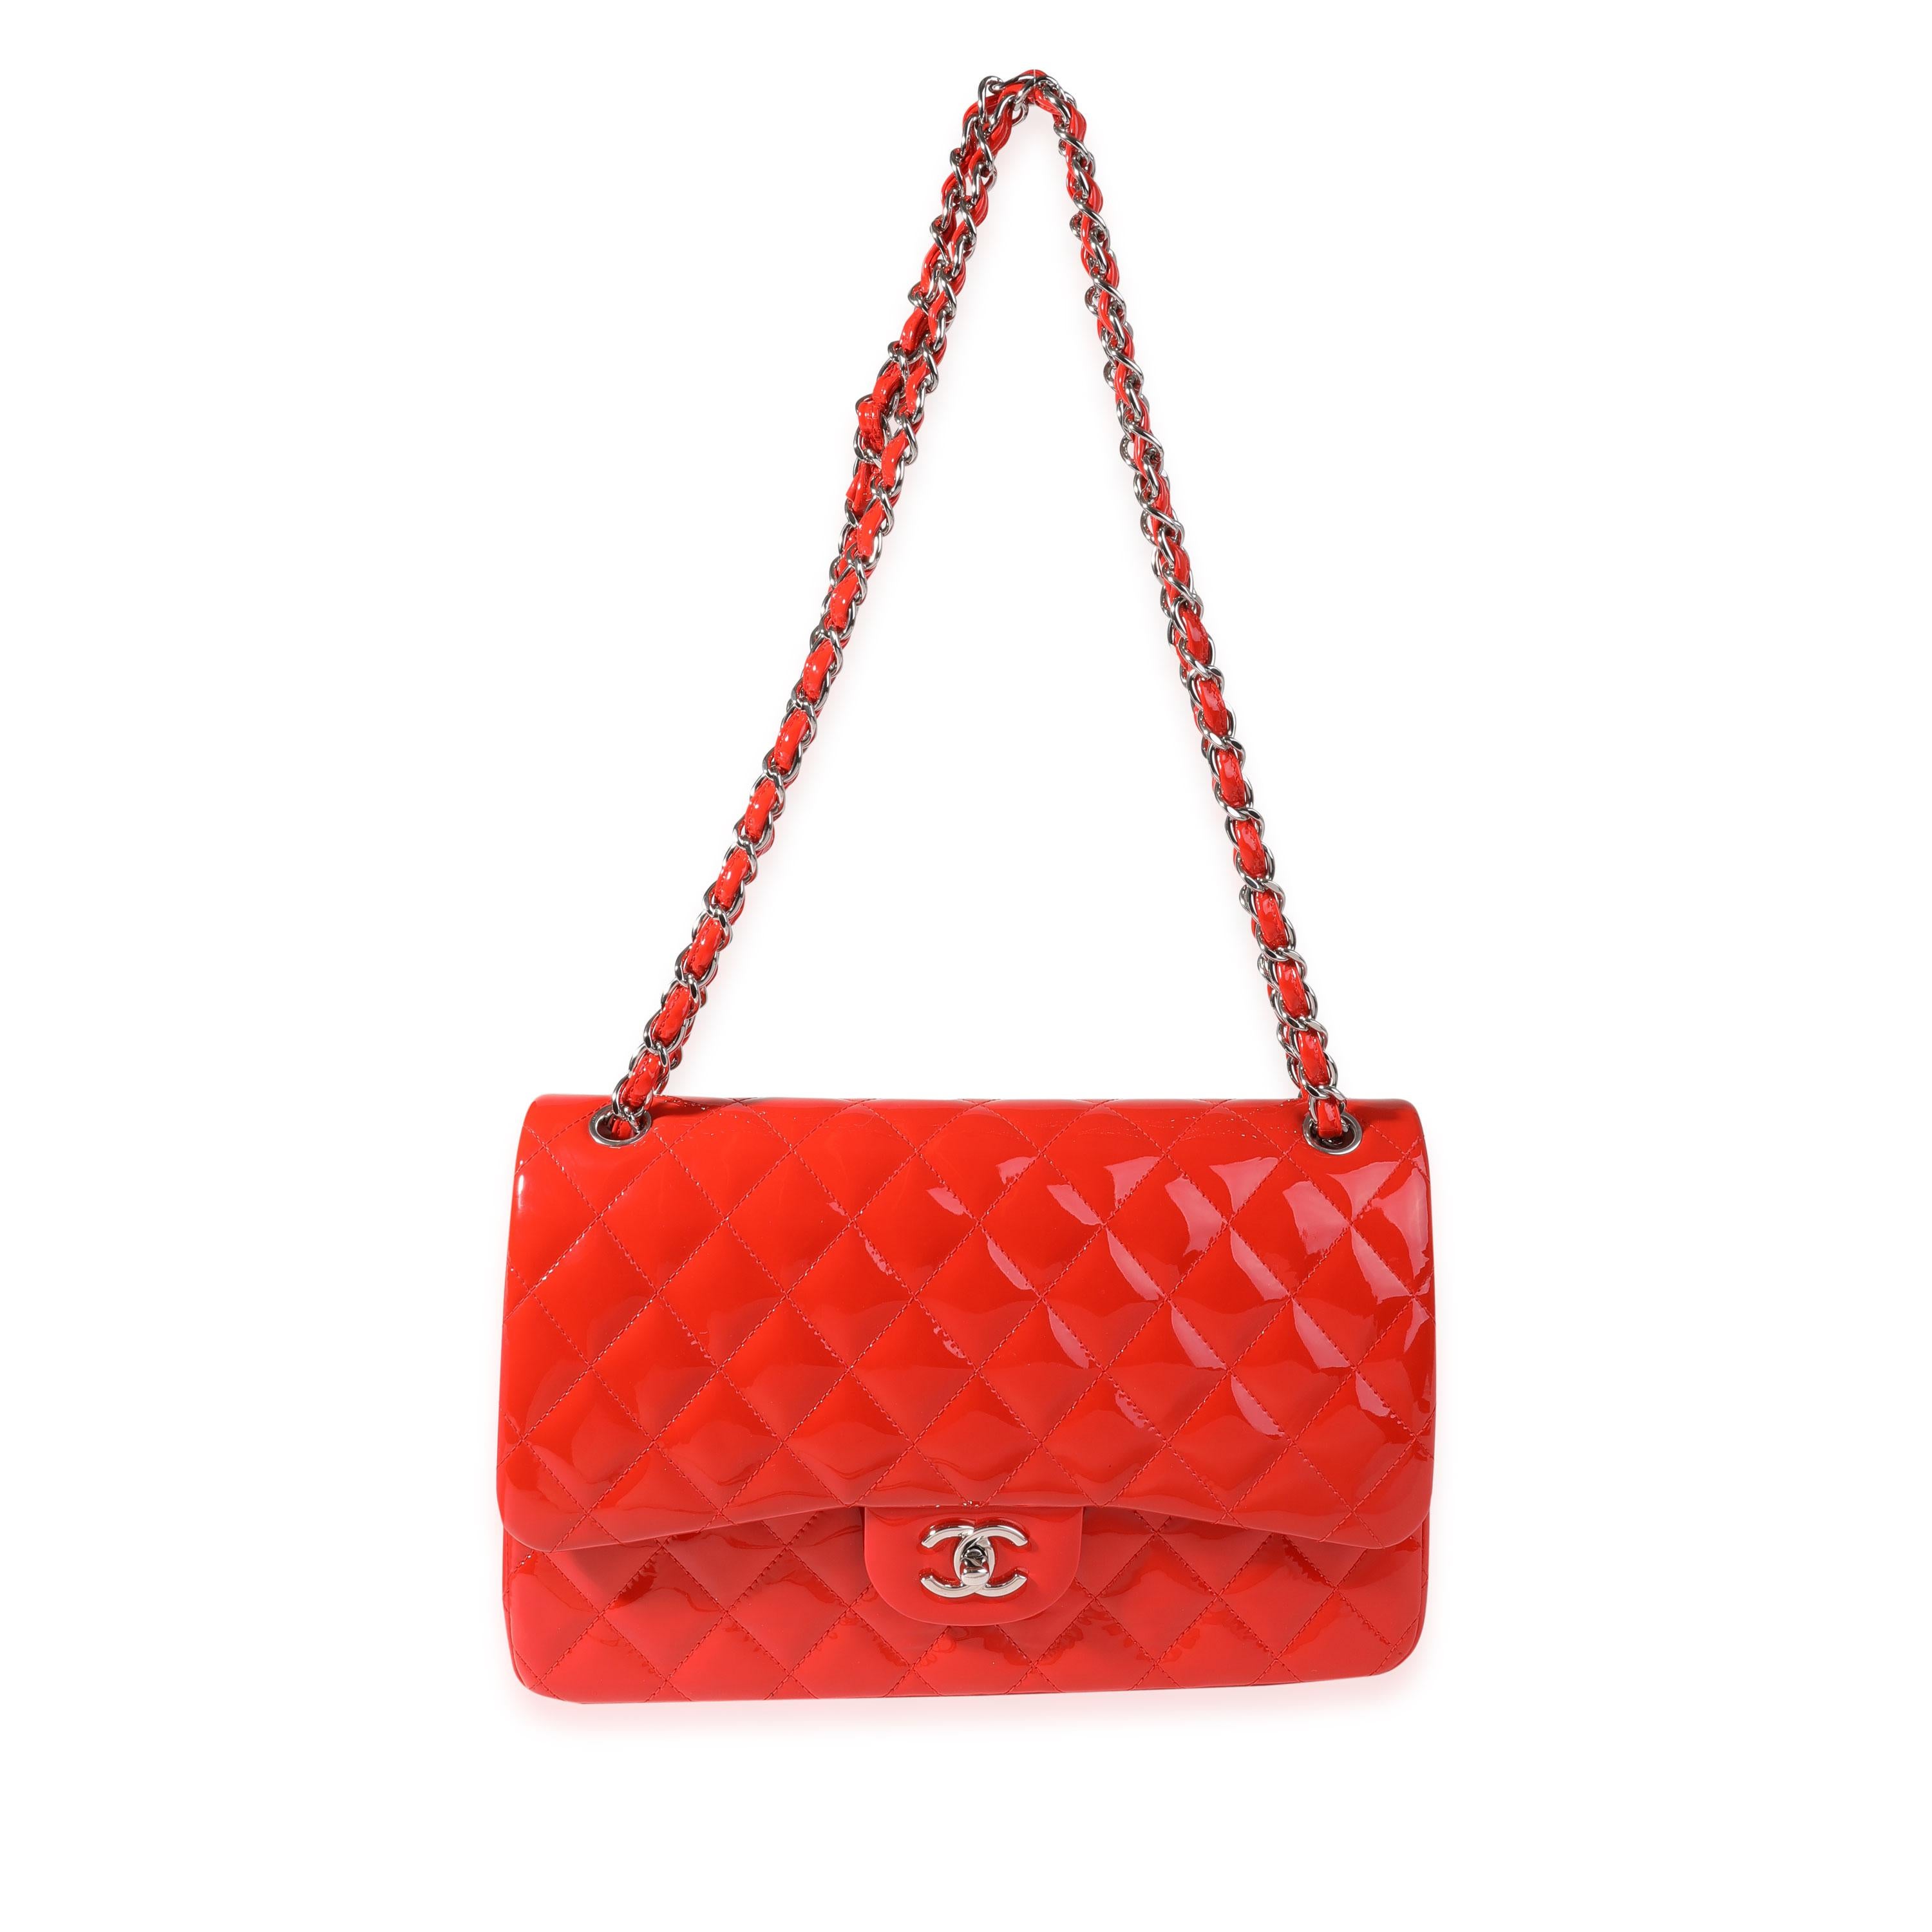 Listing Title: Chanel Red Patent Classic Jumbo Double Flap Bag
SKU: 119675
MSRP: 9500.00

Handbag Condition: Never Worn
Brand: Chanel
Model: Red Patent Classic Jumbo Double Flap Bag
Origin Country: Italy
Handbag Silhouette: Shoulder Bag
Occasions: